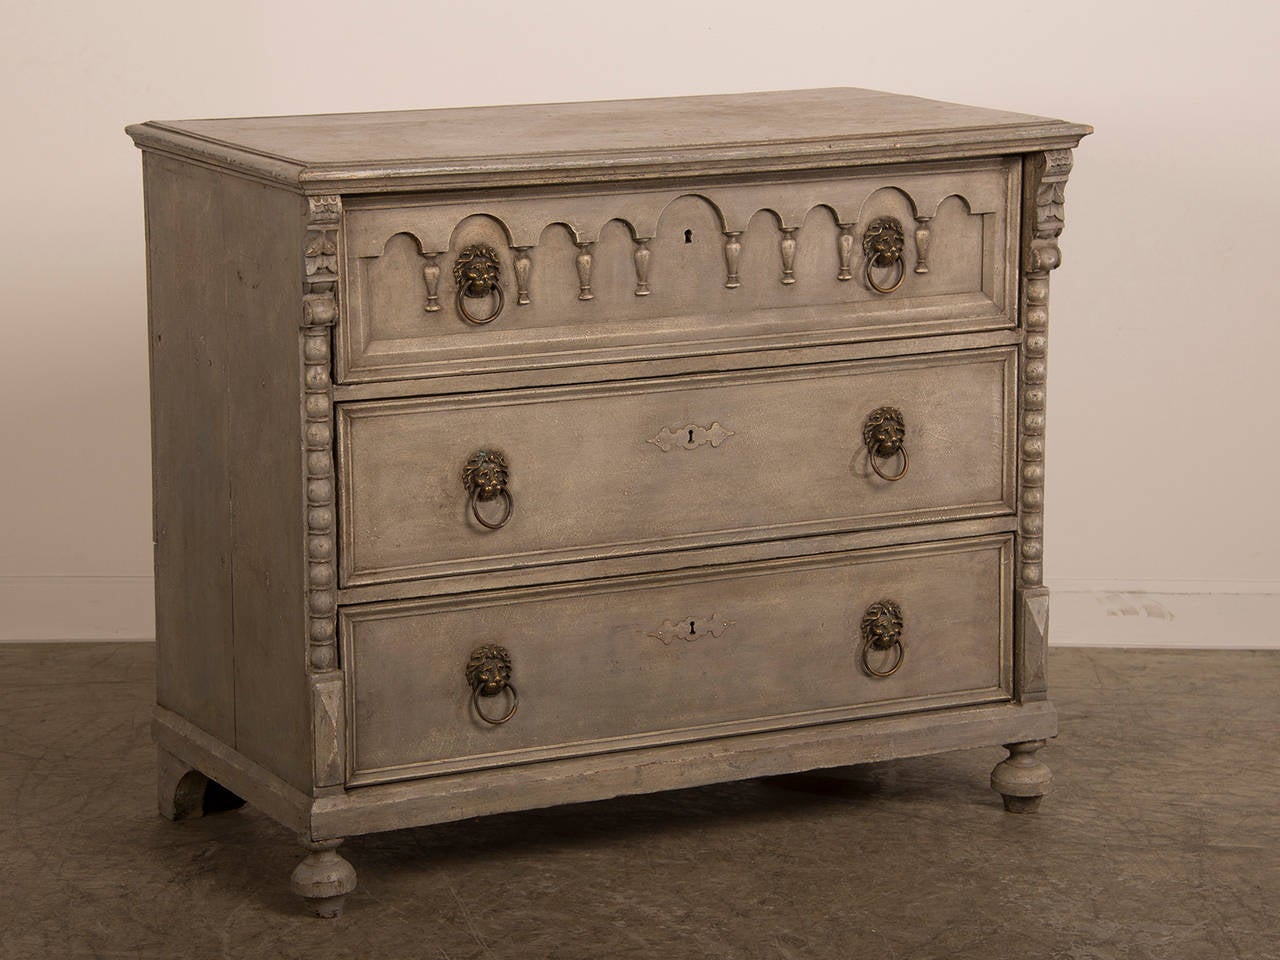 Receive our new selections direct from 1stdibs by email each week. Please click Follow Dealer below and see them first!

This antique English chest circa 1850 has fantastic decorative detail seen across the entire facade that is embellished with